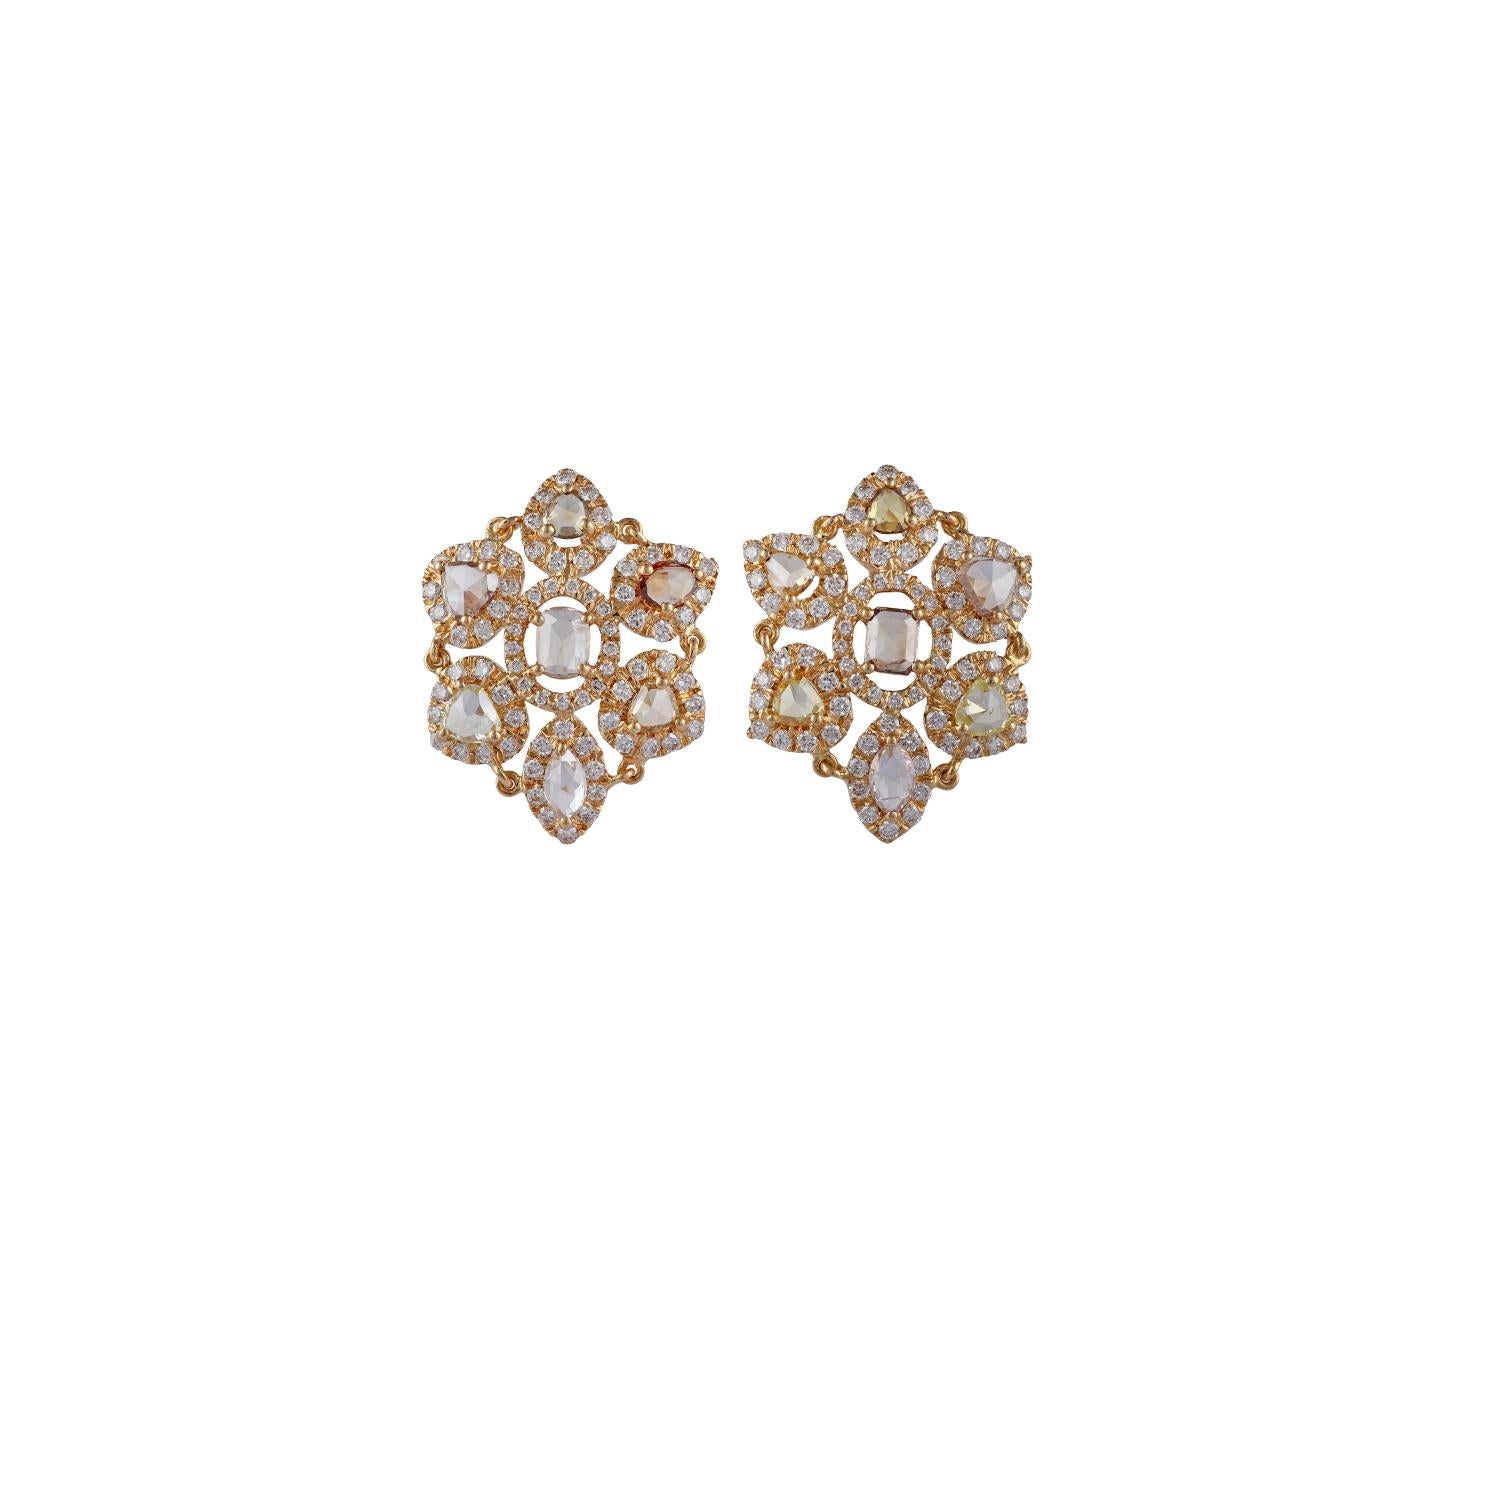 An exclusive pair of earrings with rose cuts yellow diamond weight 2.80 carats with the clusters of round brilliant cut diamonds weight 1.50 carats, the entire earrings are studded in 18K yellow gold weight 6.32 grams. These earrings have a simple